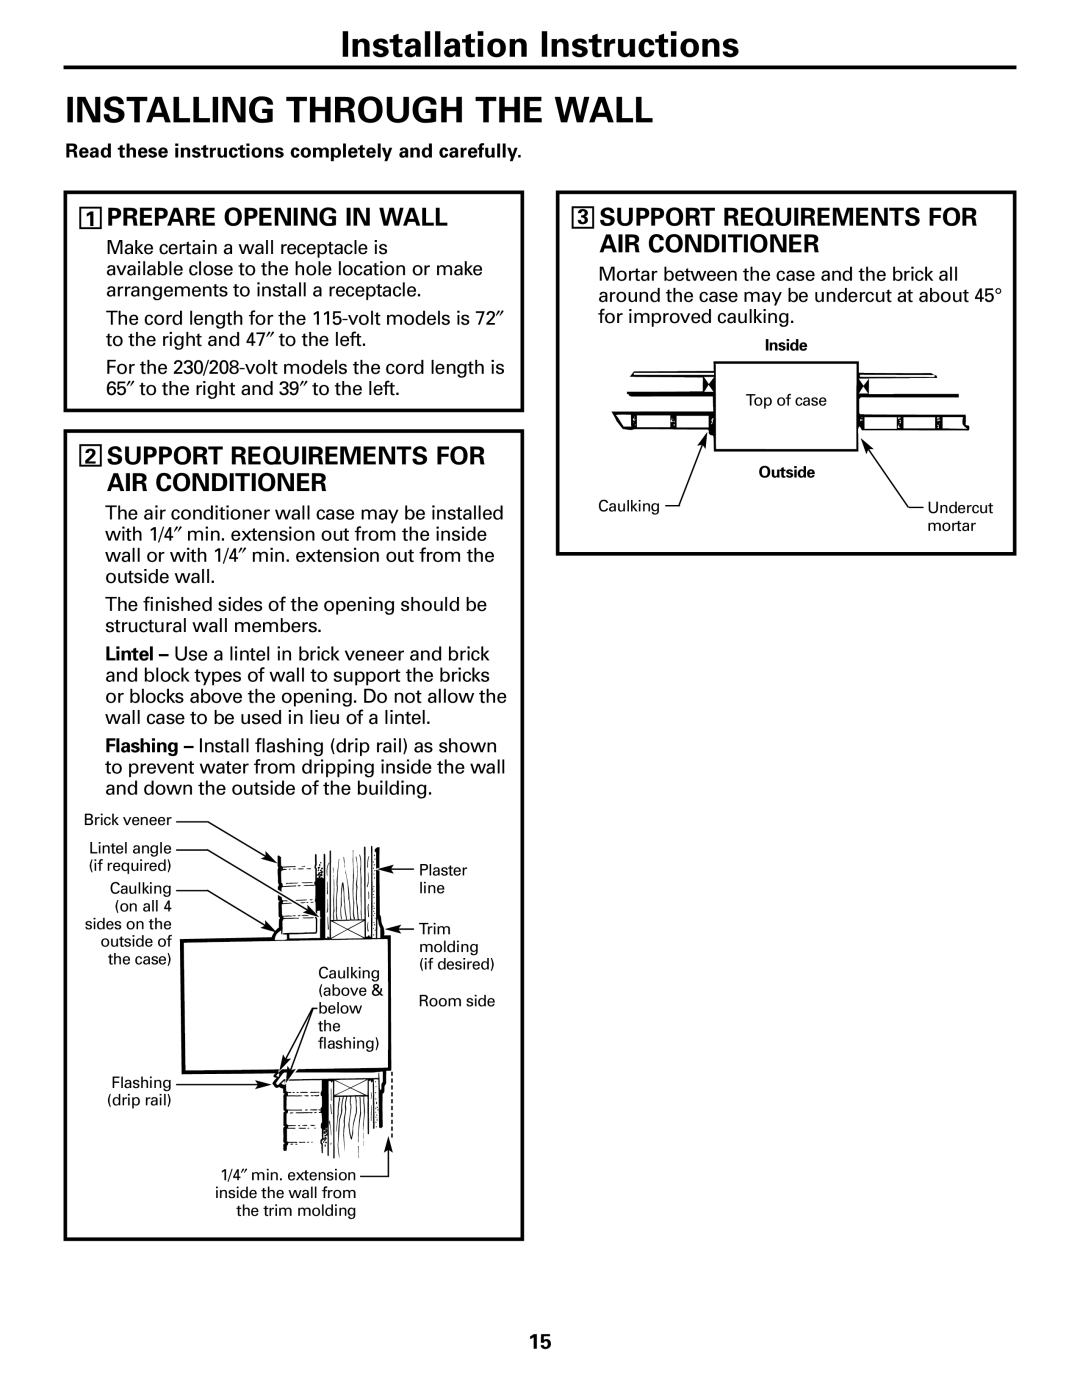 GE AJHS10DCC installation instructions Installing Through The Wall, Installation Instructions, 1PREPARE OPENING IN WALL 